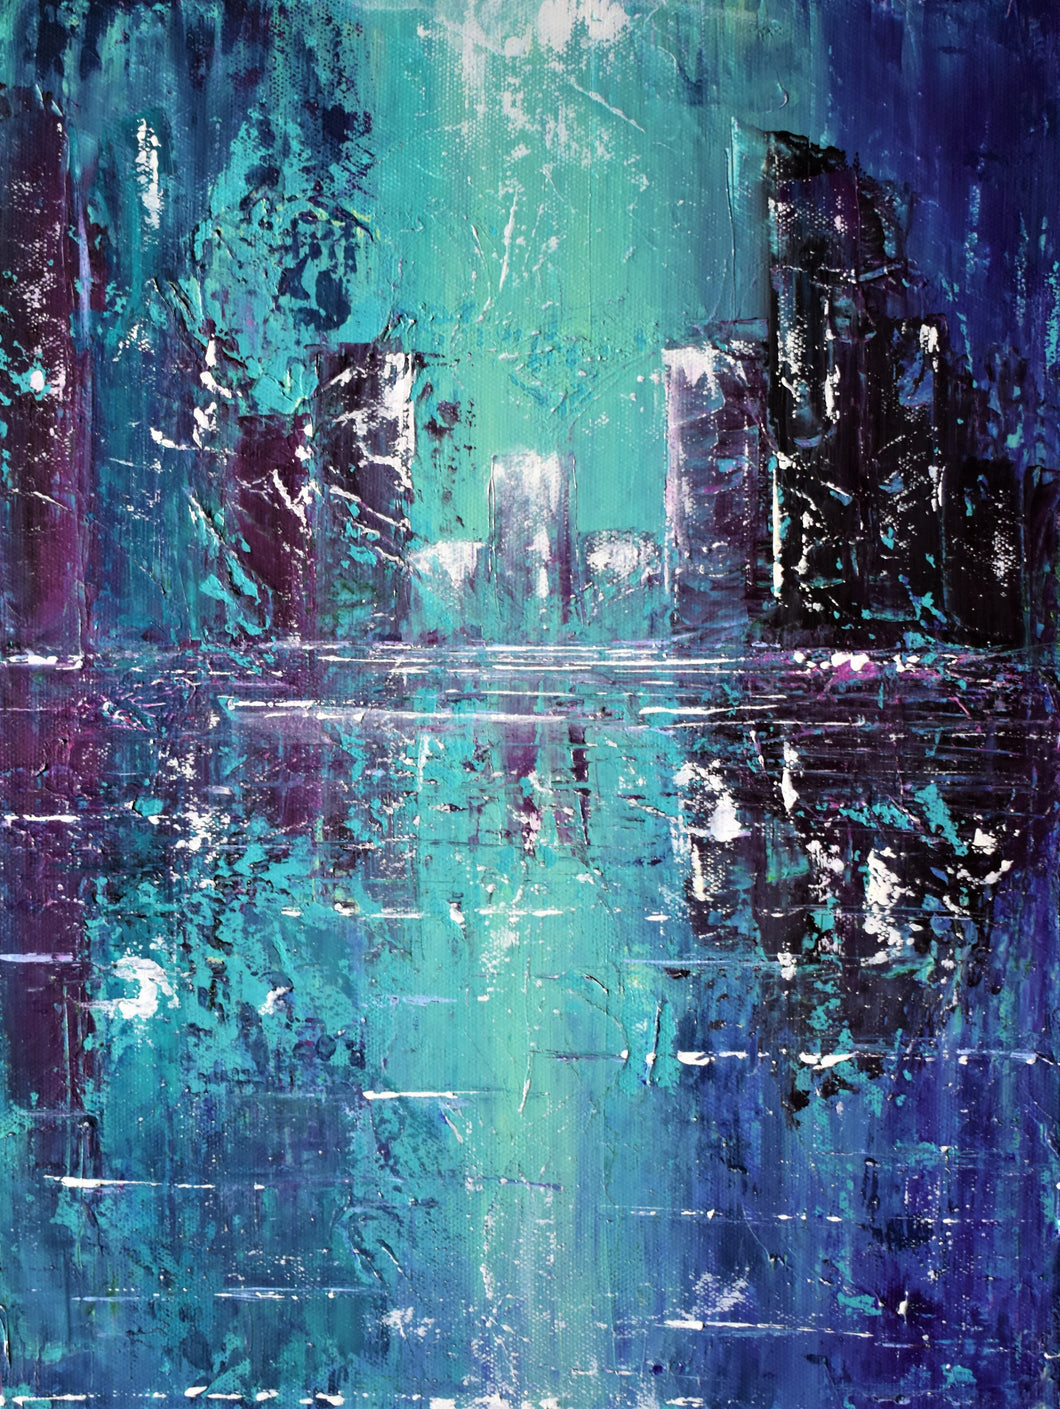 Original abstract painting of a cityscape with reflections in blues, teals and purples